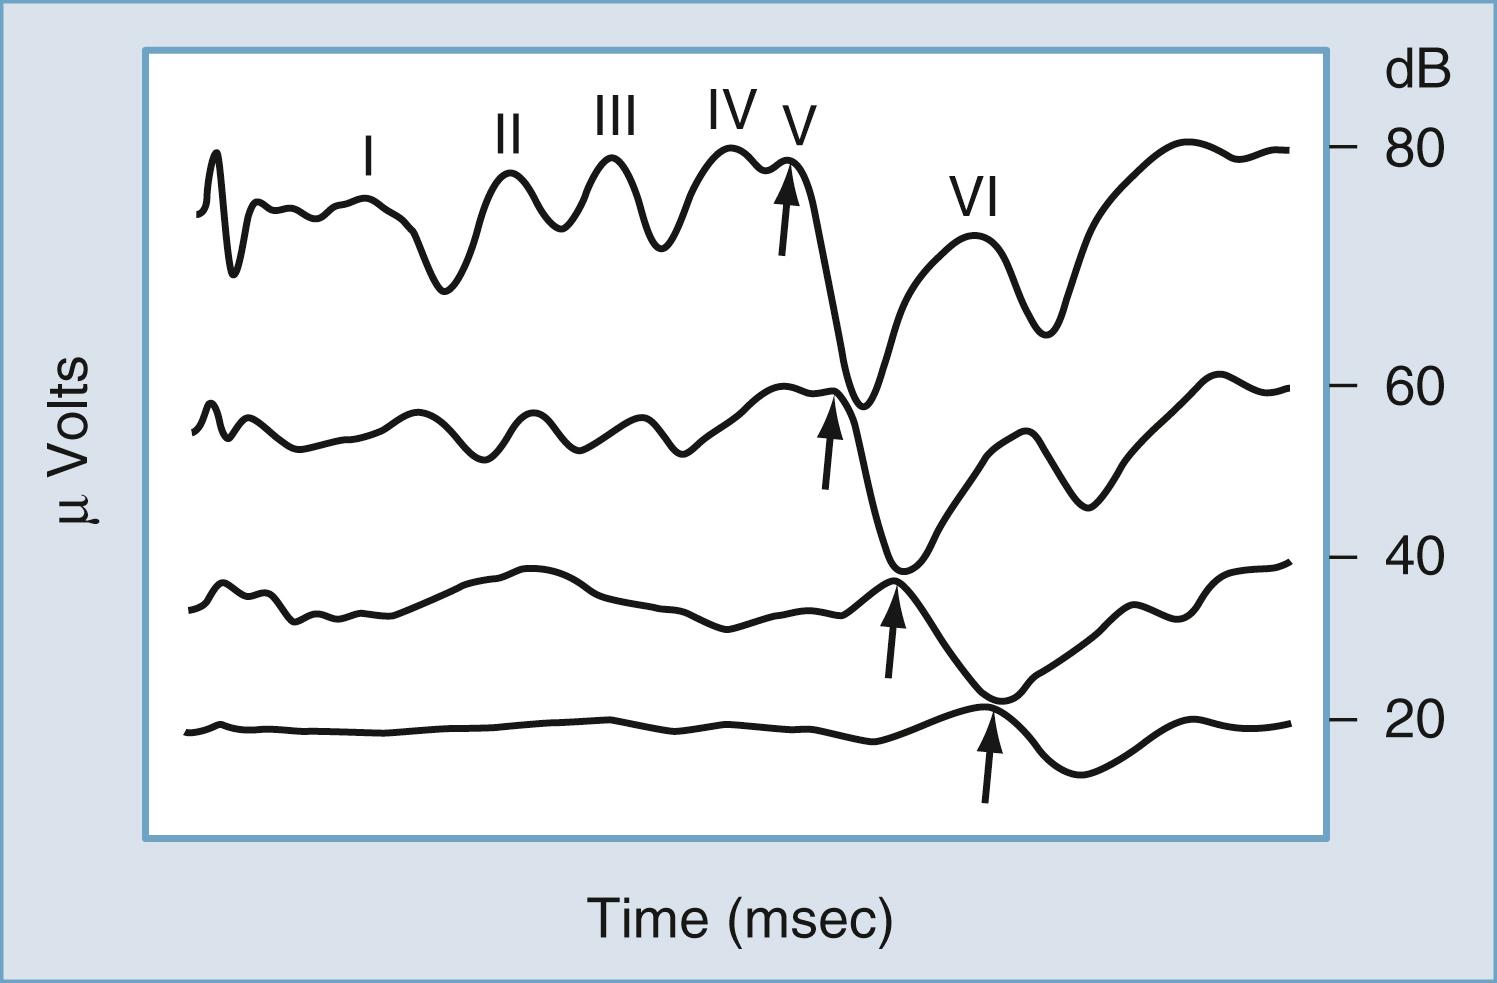 Figure 16.10, Wave latency results for auditory brainstem evoked responses, graphed as a function of decreasing stimulus level. The time window is 10 msec. Arrows indicate identification of wave V latency.